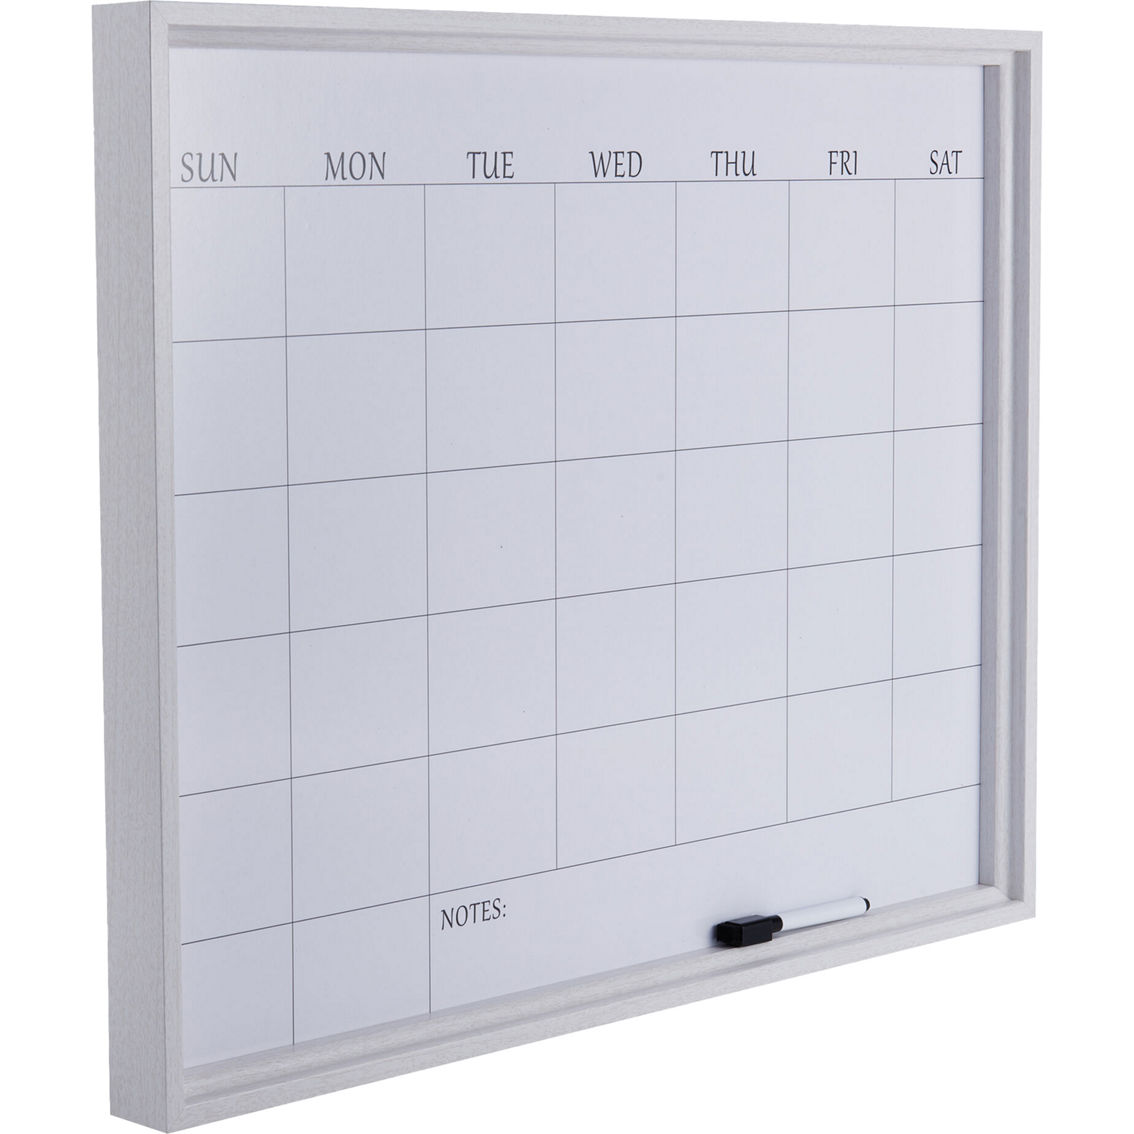 Towle Living 24 x 19 in. Whiteboard Calendar with Dry Erase Pen - Image 2 of 5